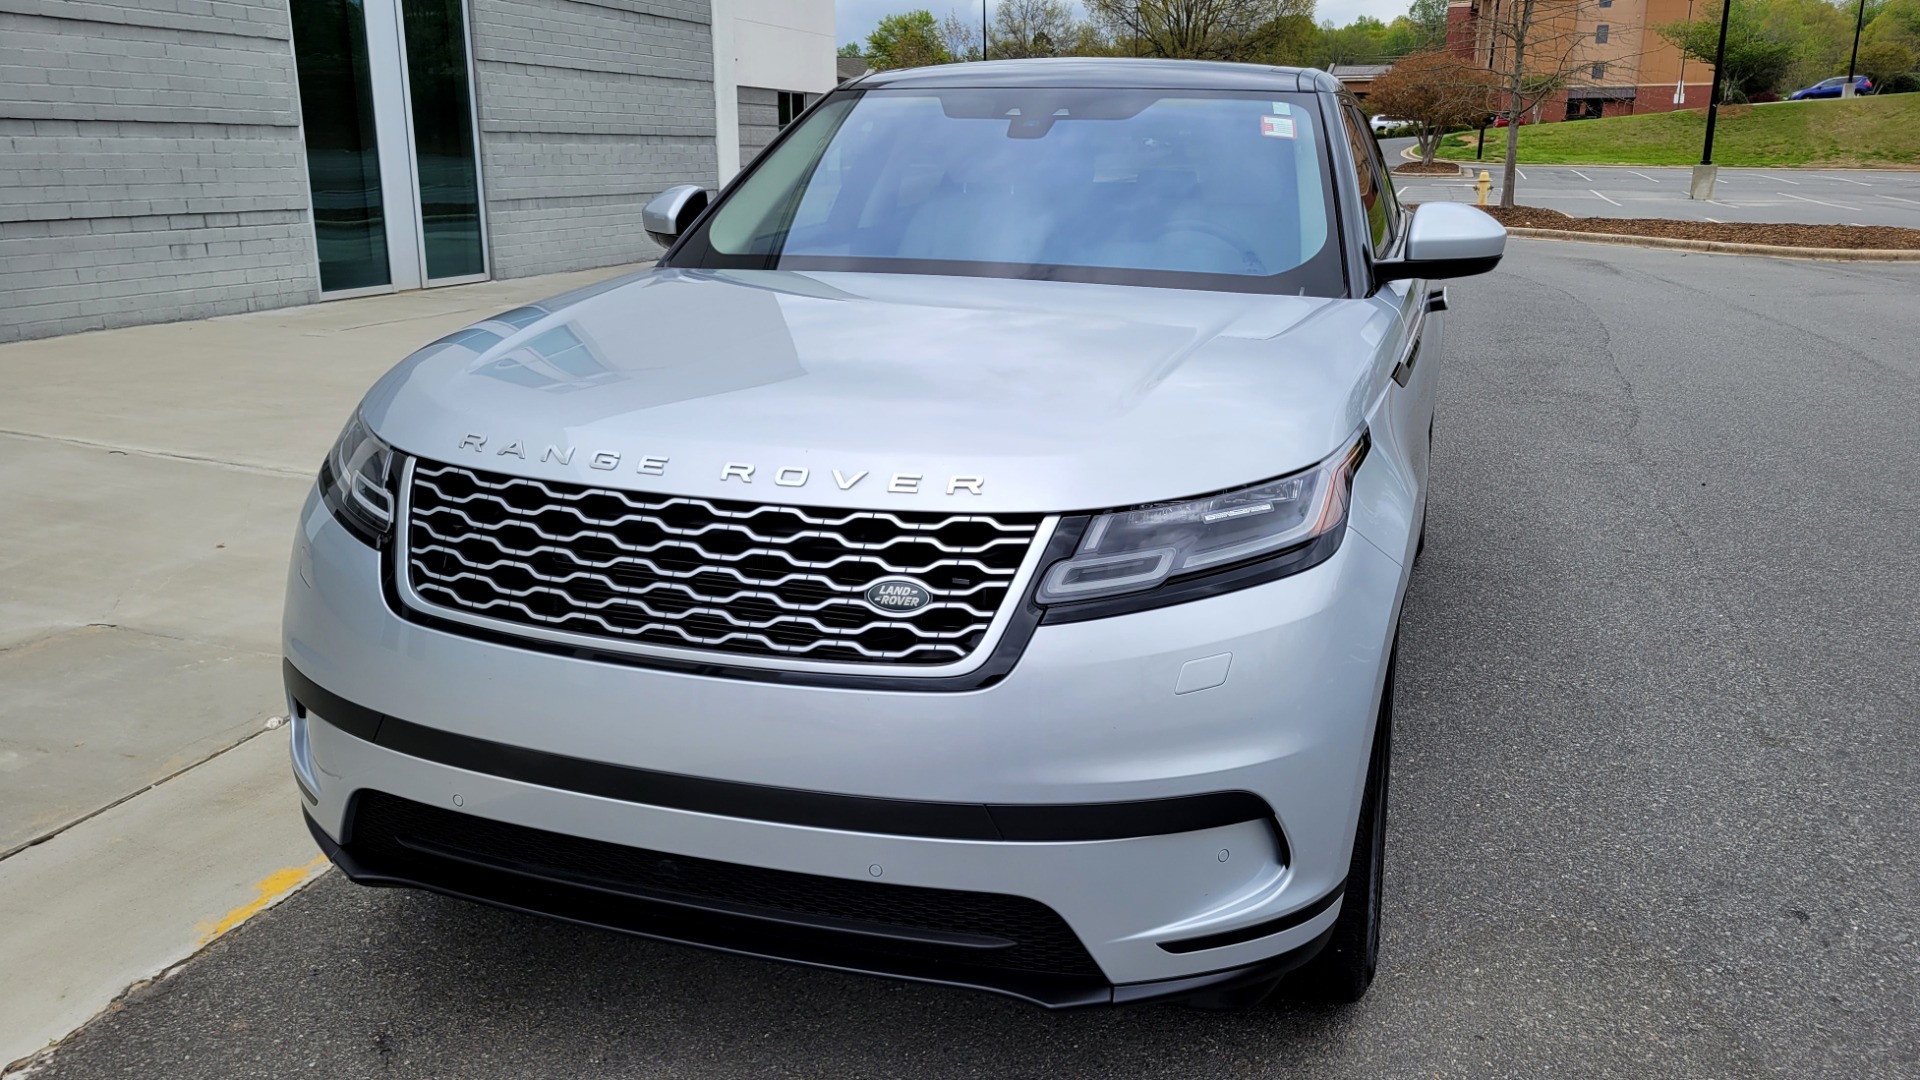 Used 2020 Land Rover RANGE ROVER VELAR S / AWD / 2.0L TURBO / NAV / SUNROOF / 19IN WHLS / REARVIEW for sale $59,995 at Formula Imports in Charlotte NC 28227 2